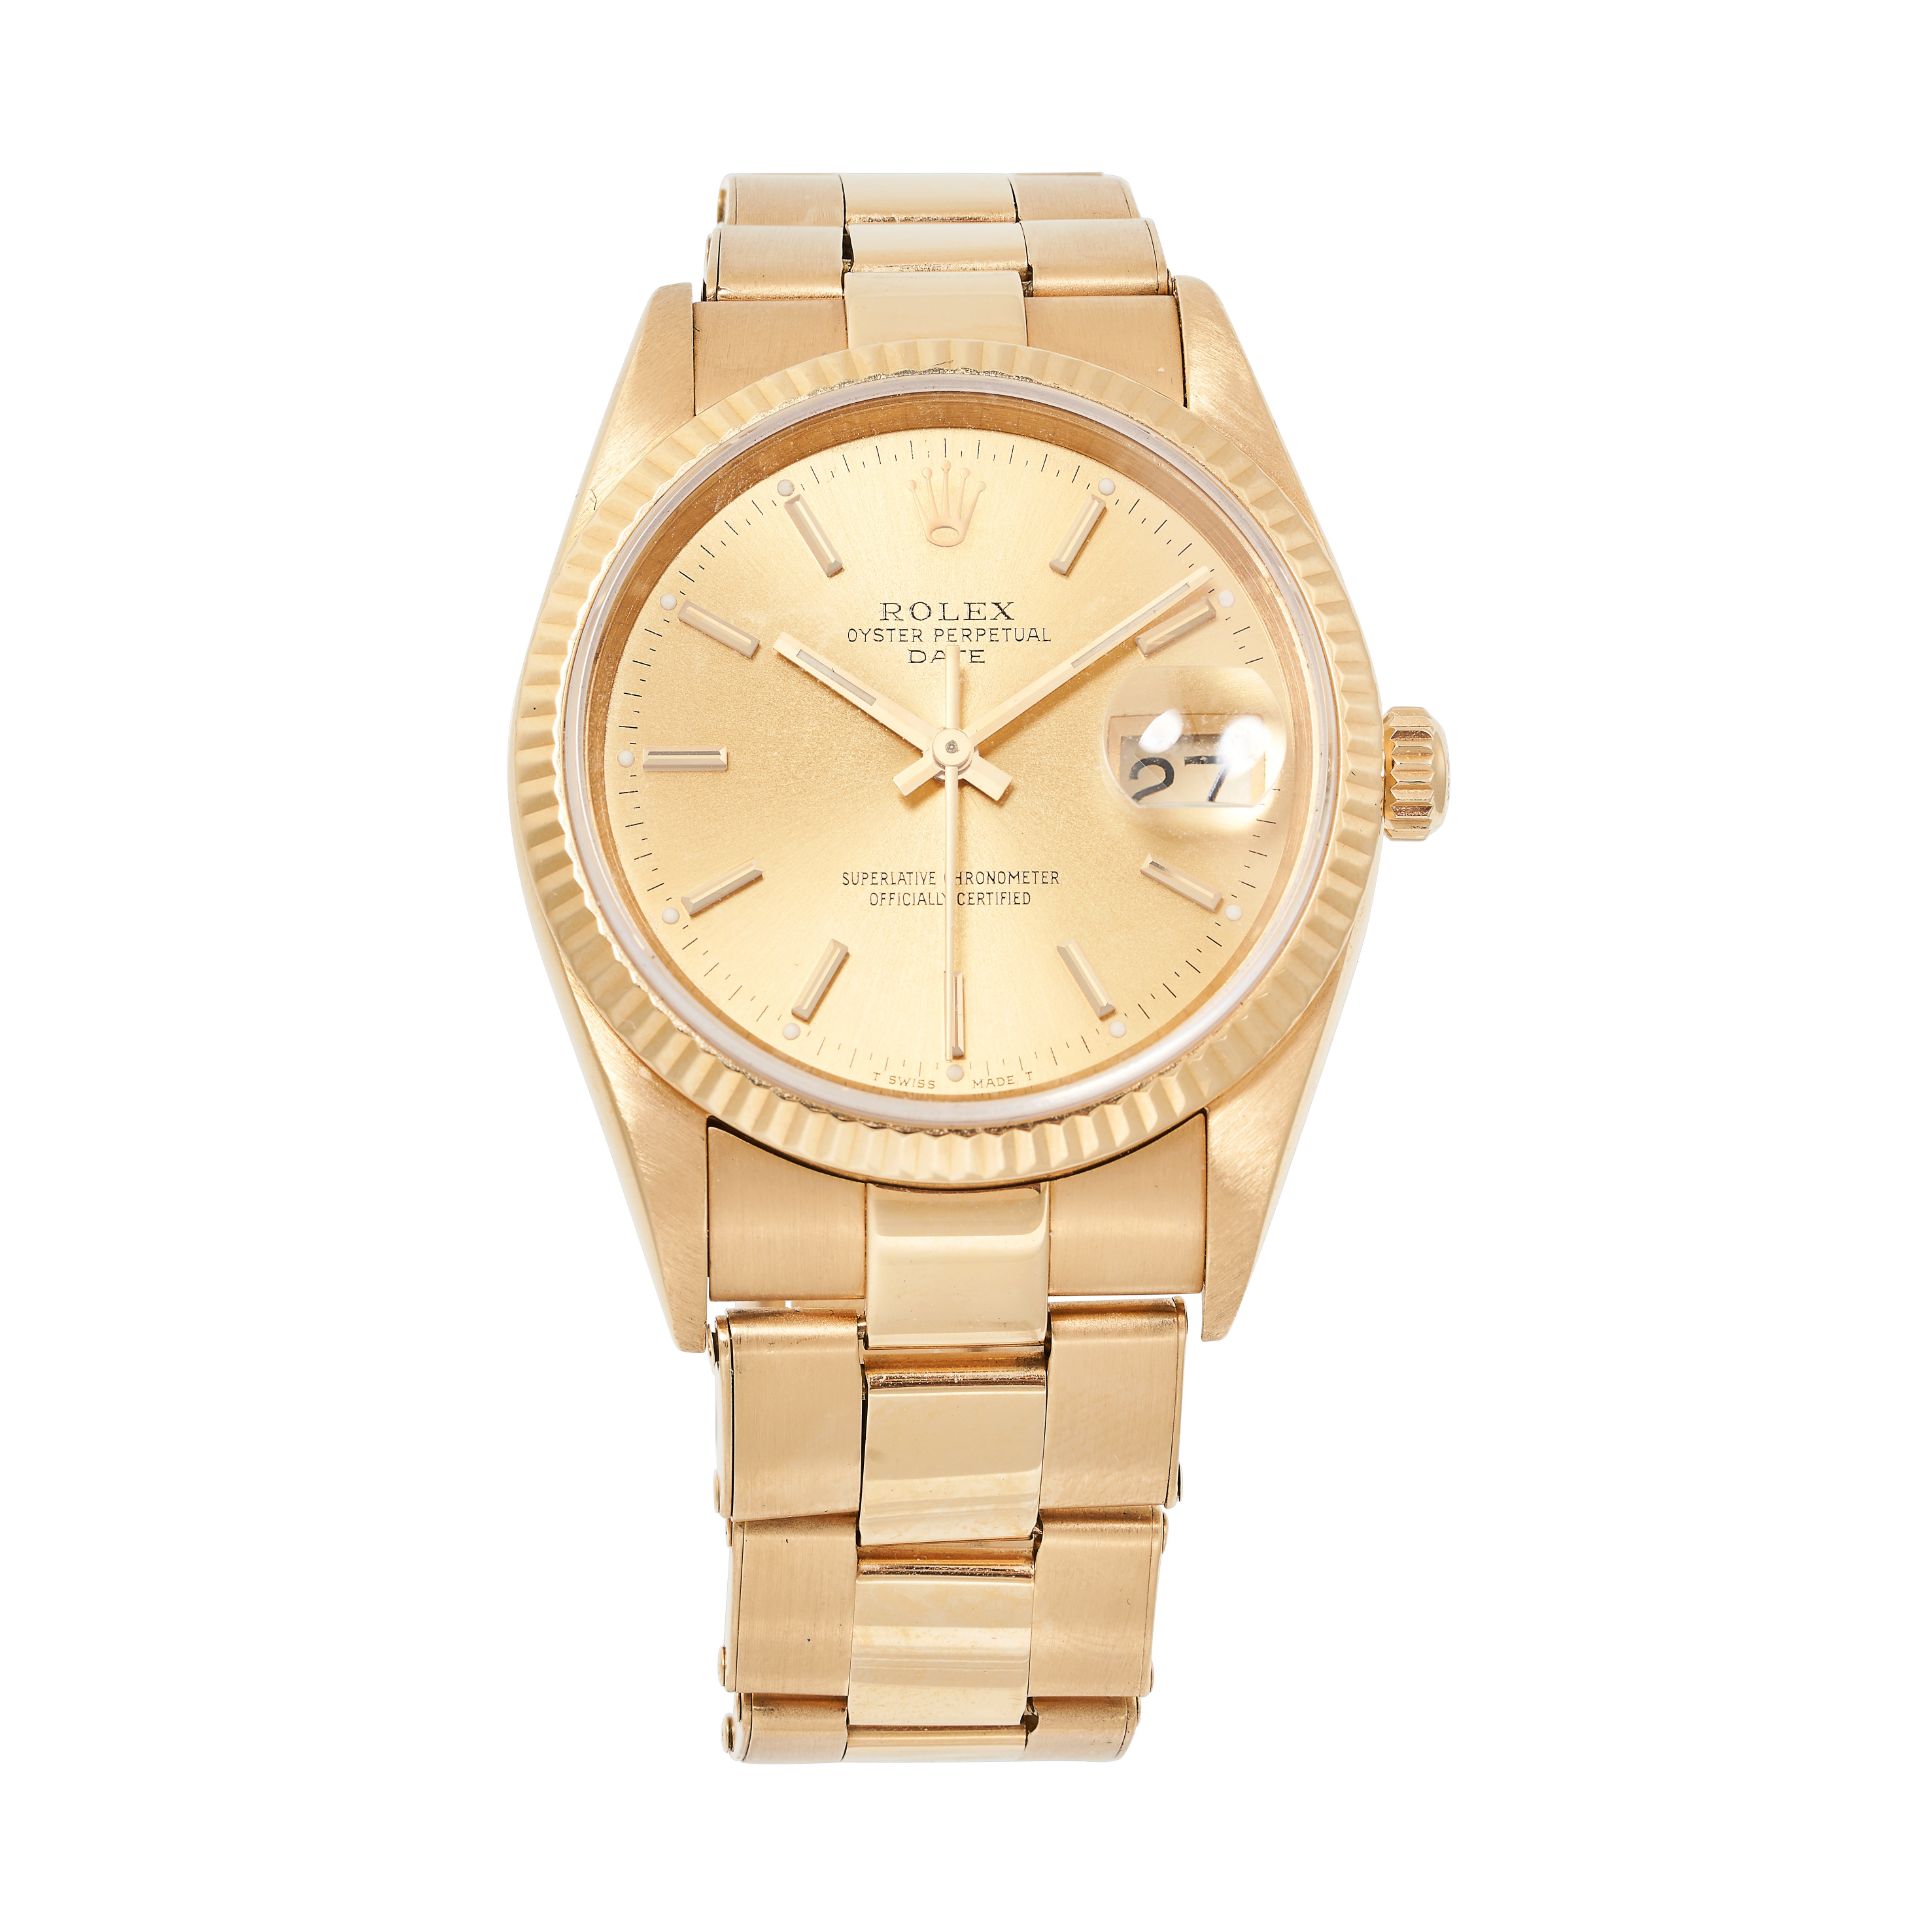 ROLEX, AN OYSTER PERPETUAL DATE WRISTWATCH, REF 15238, 1990, in 18ct yellow gold, gold dial with